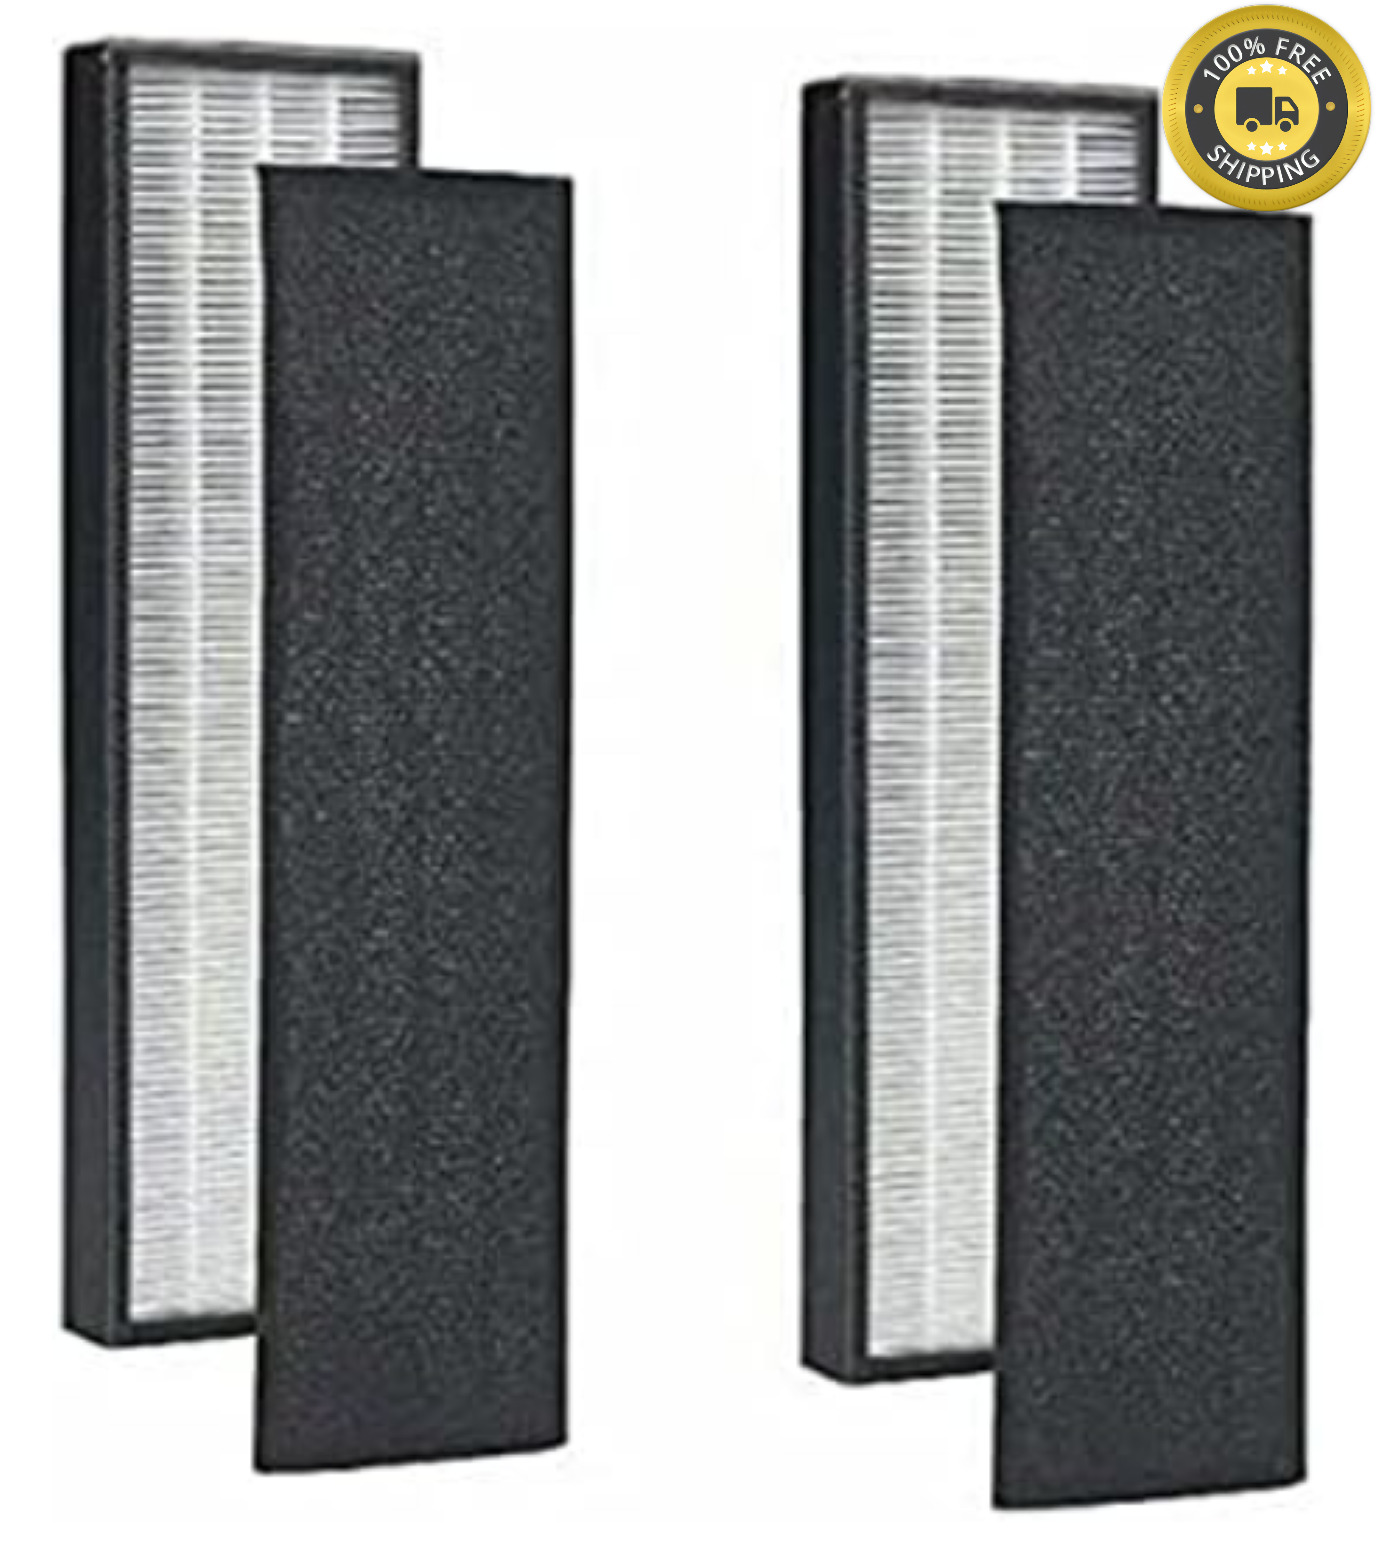 2-Pack HQRP Replacement HEPA Filter Size C for GermGuardian Series Air Purifiers